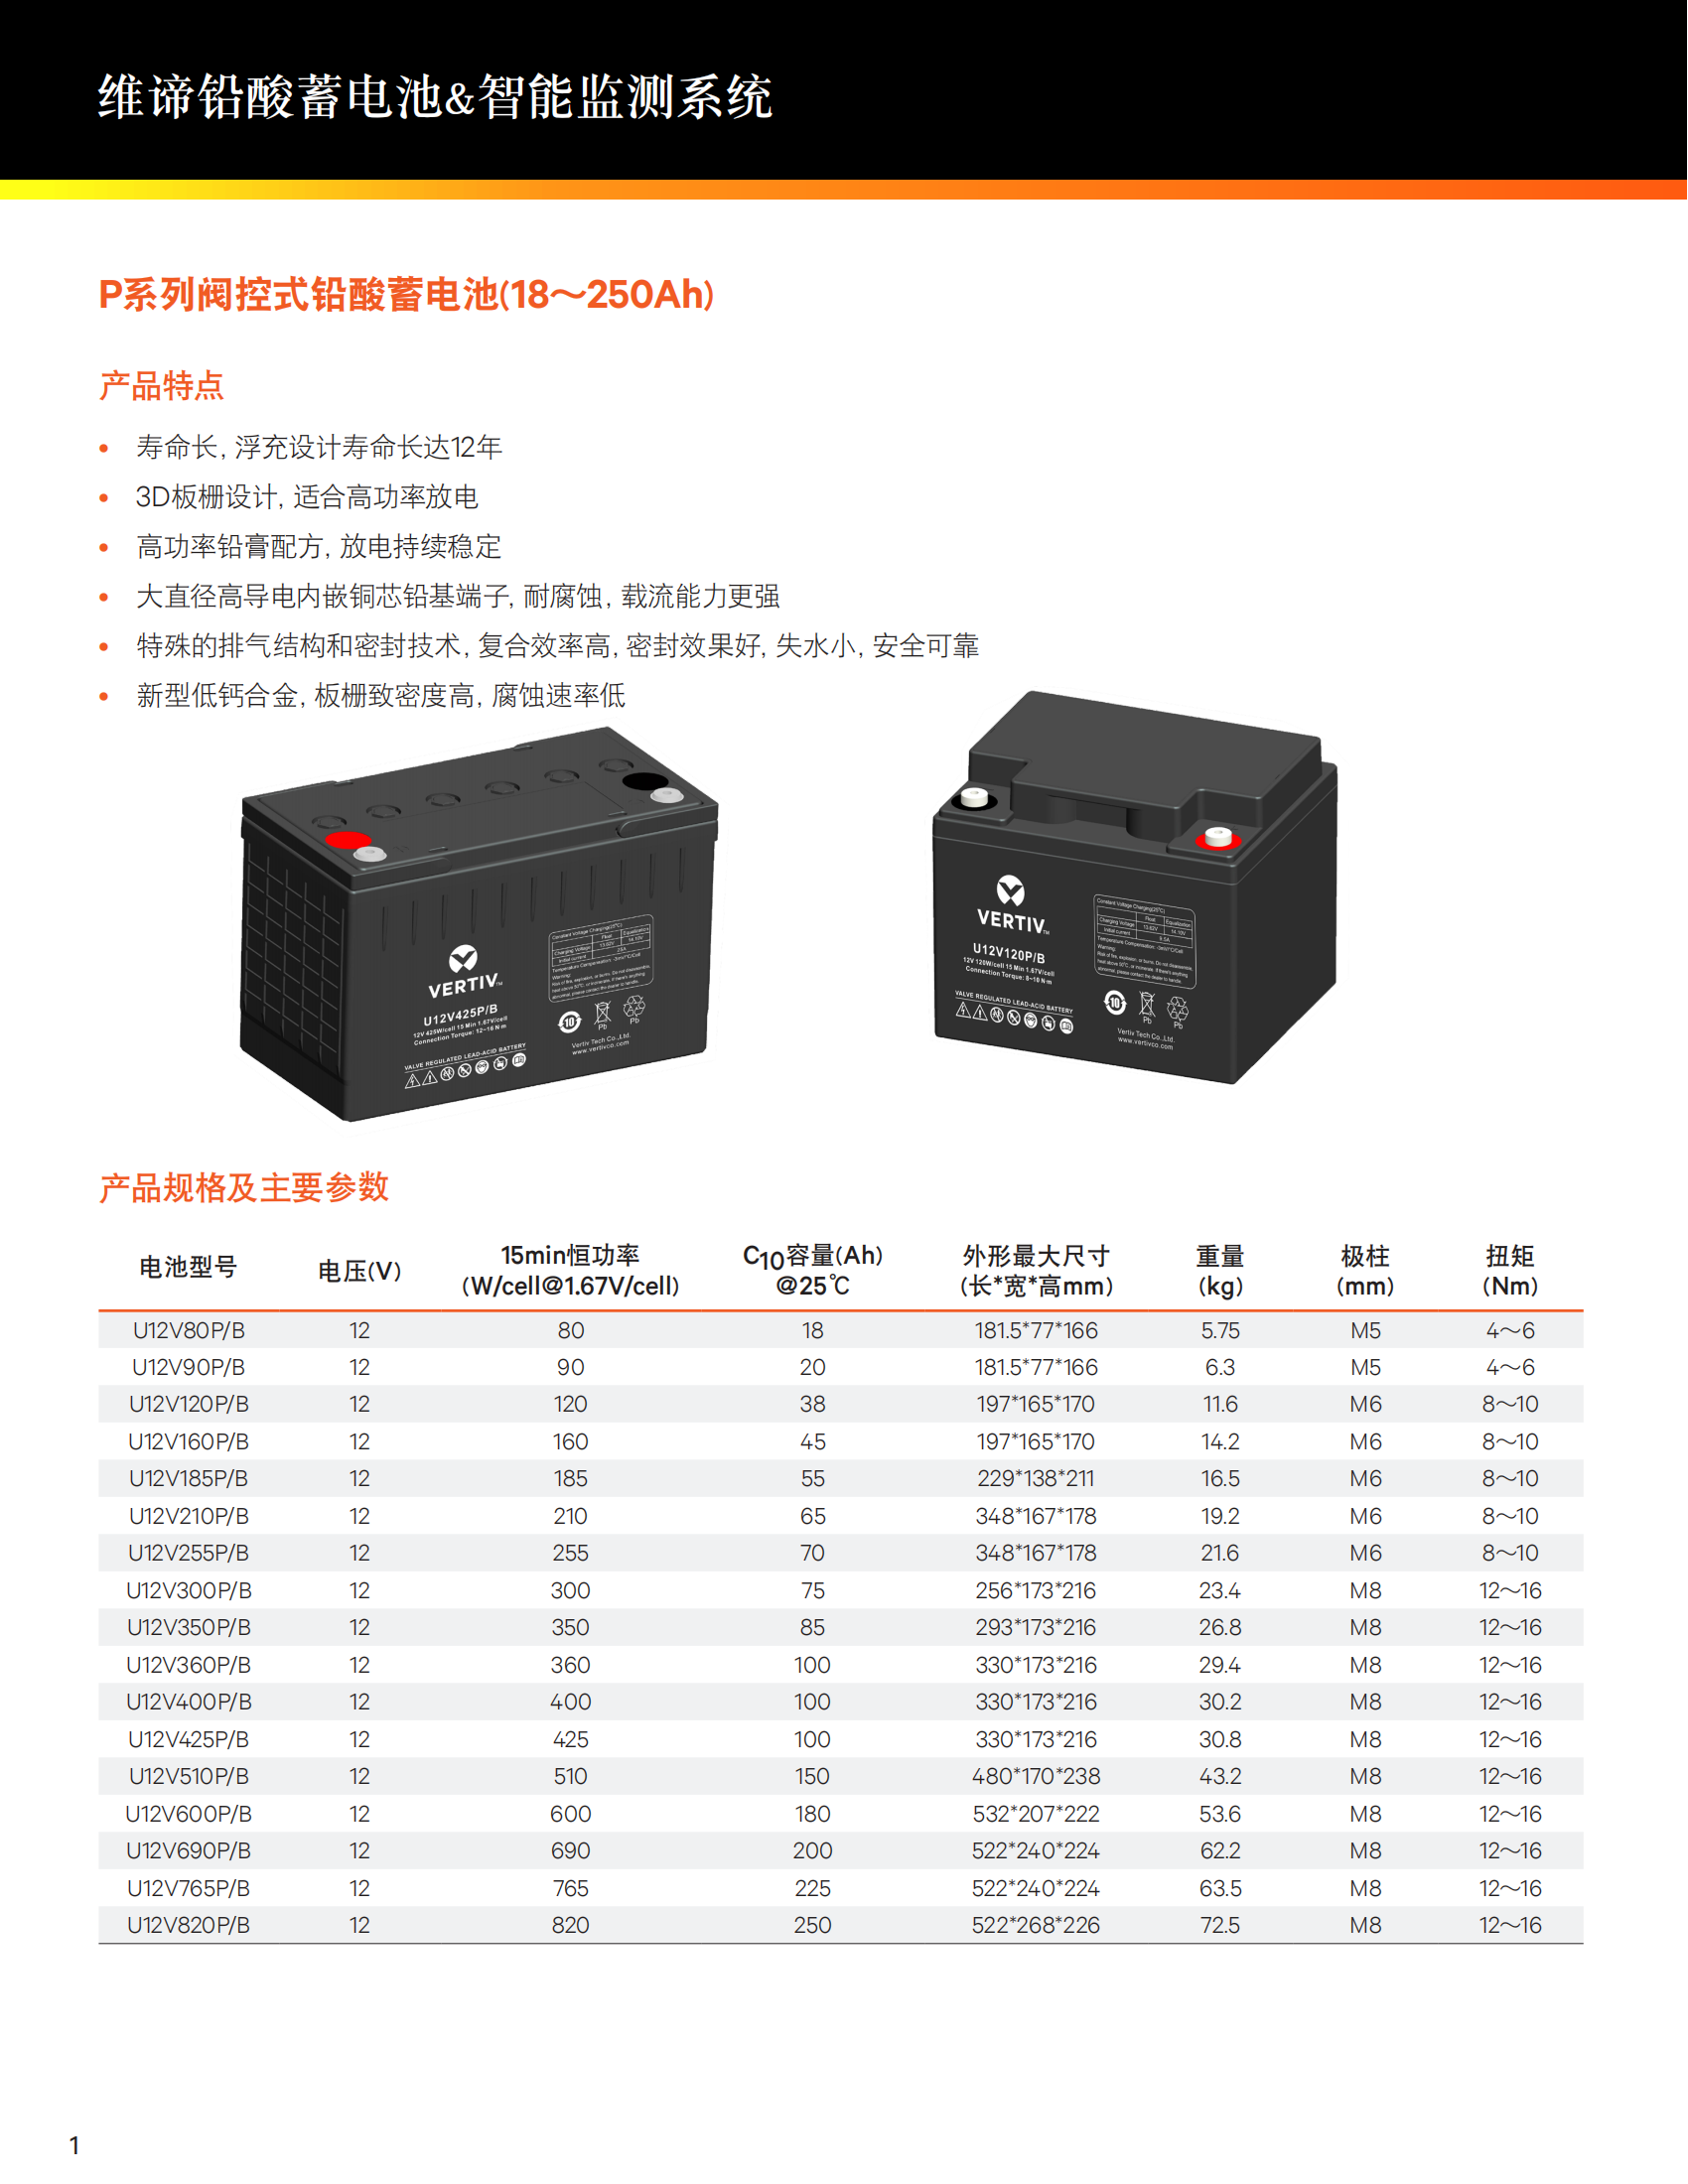 acp-power-ups-chinese-brochure_01.png